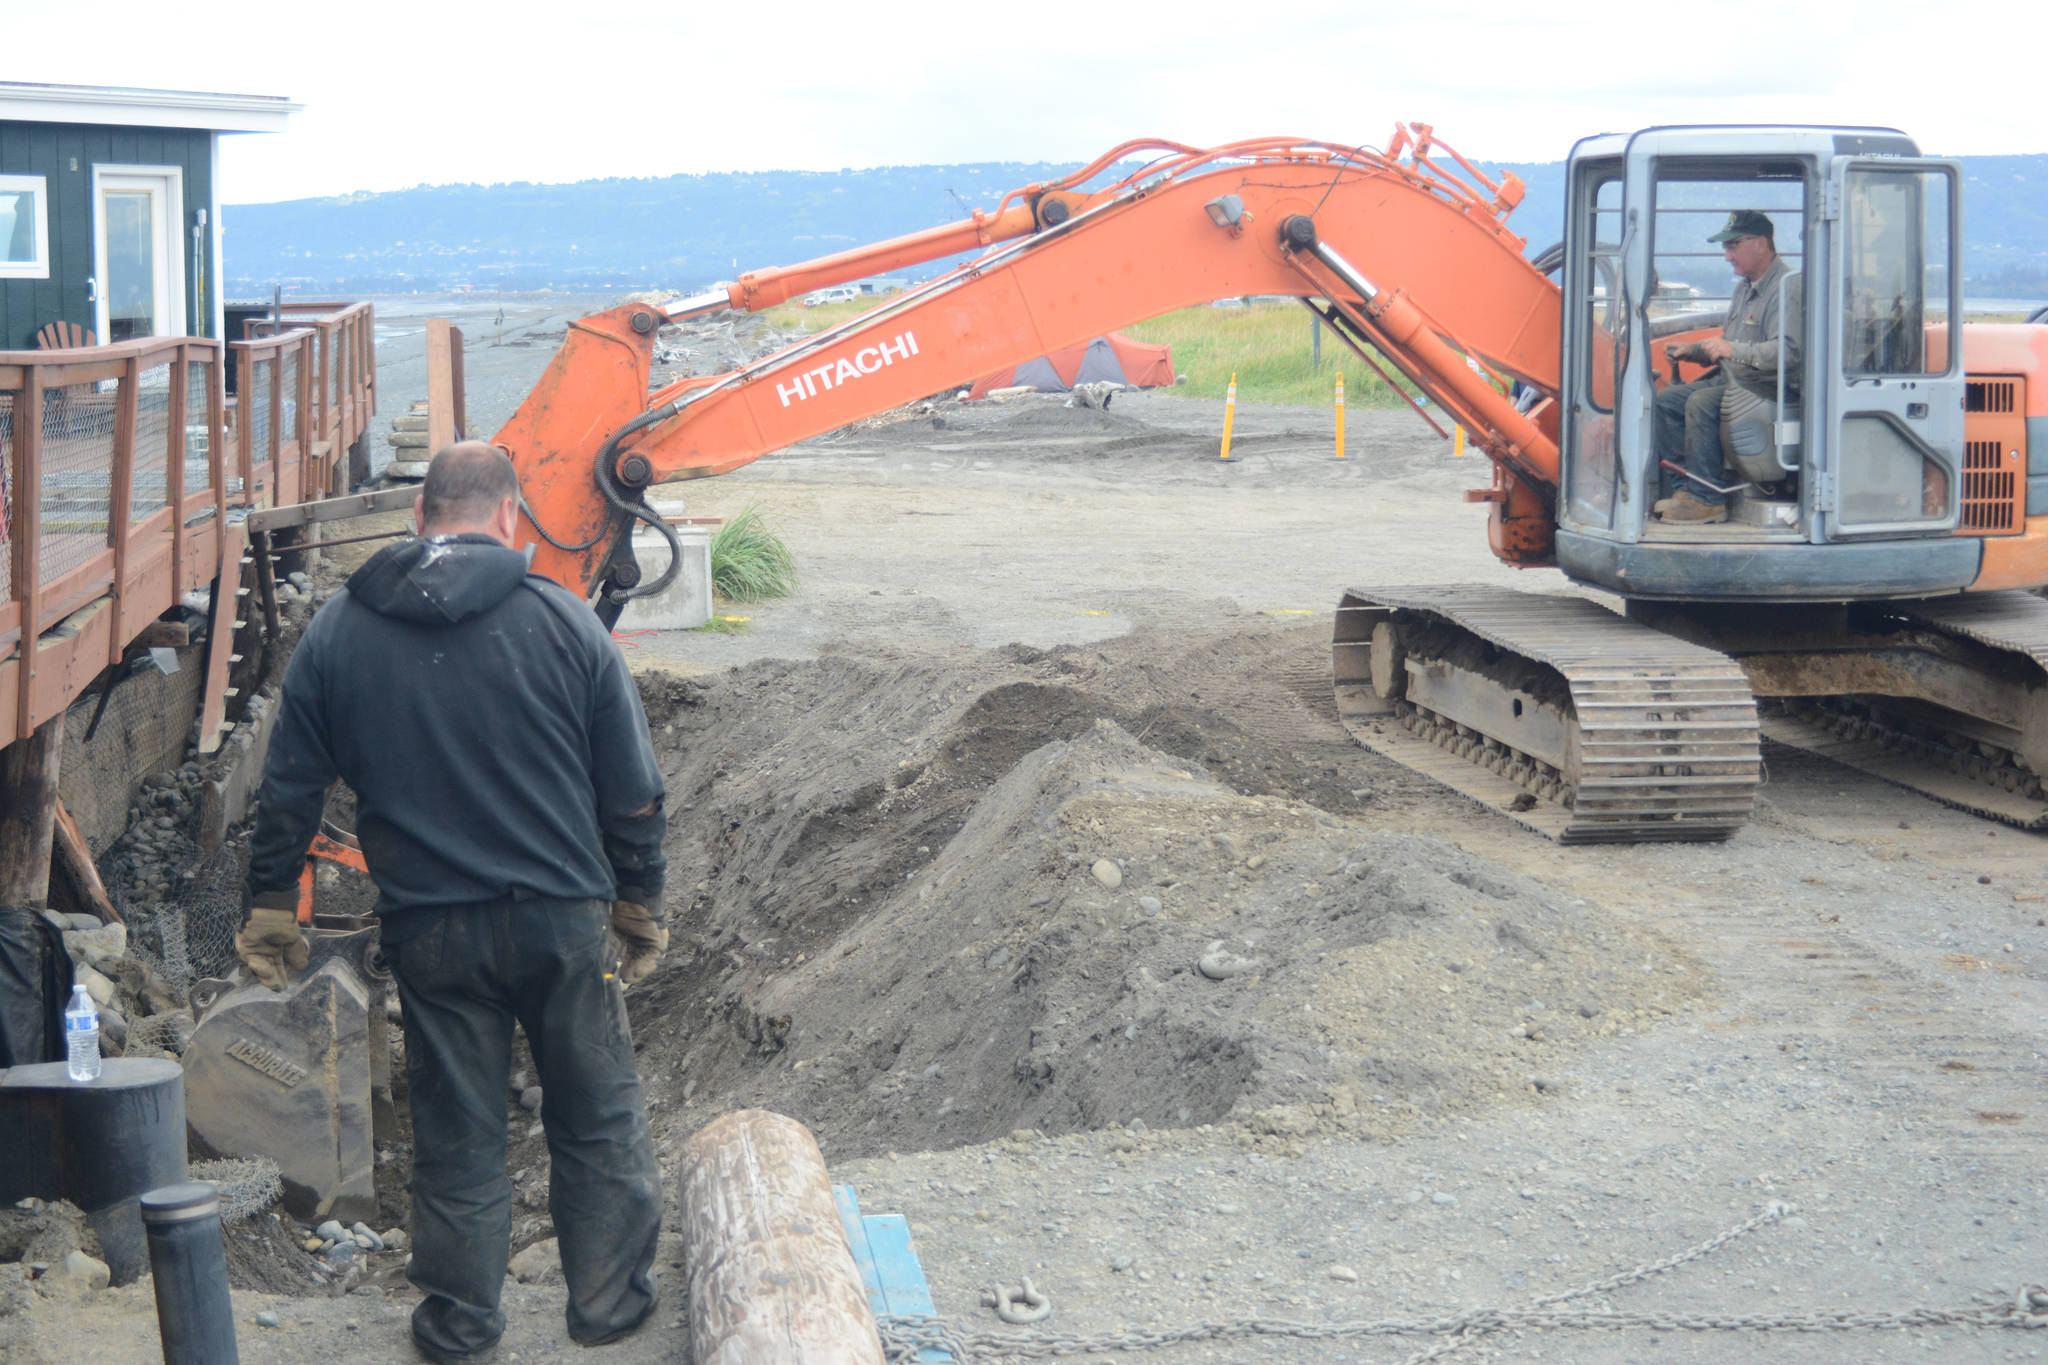 John Wise, left, and Nathan Wise, right, in backhoe, make repairs of the Glacier Drive-In on the Homer Spit, on Aug. 16, 2018, after a series of storms that eroded the beach last week during high tides in Homer, Alaska. (Photo by Michael Armstrong/Homer News)